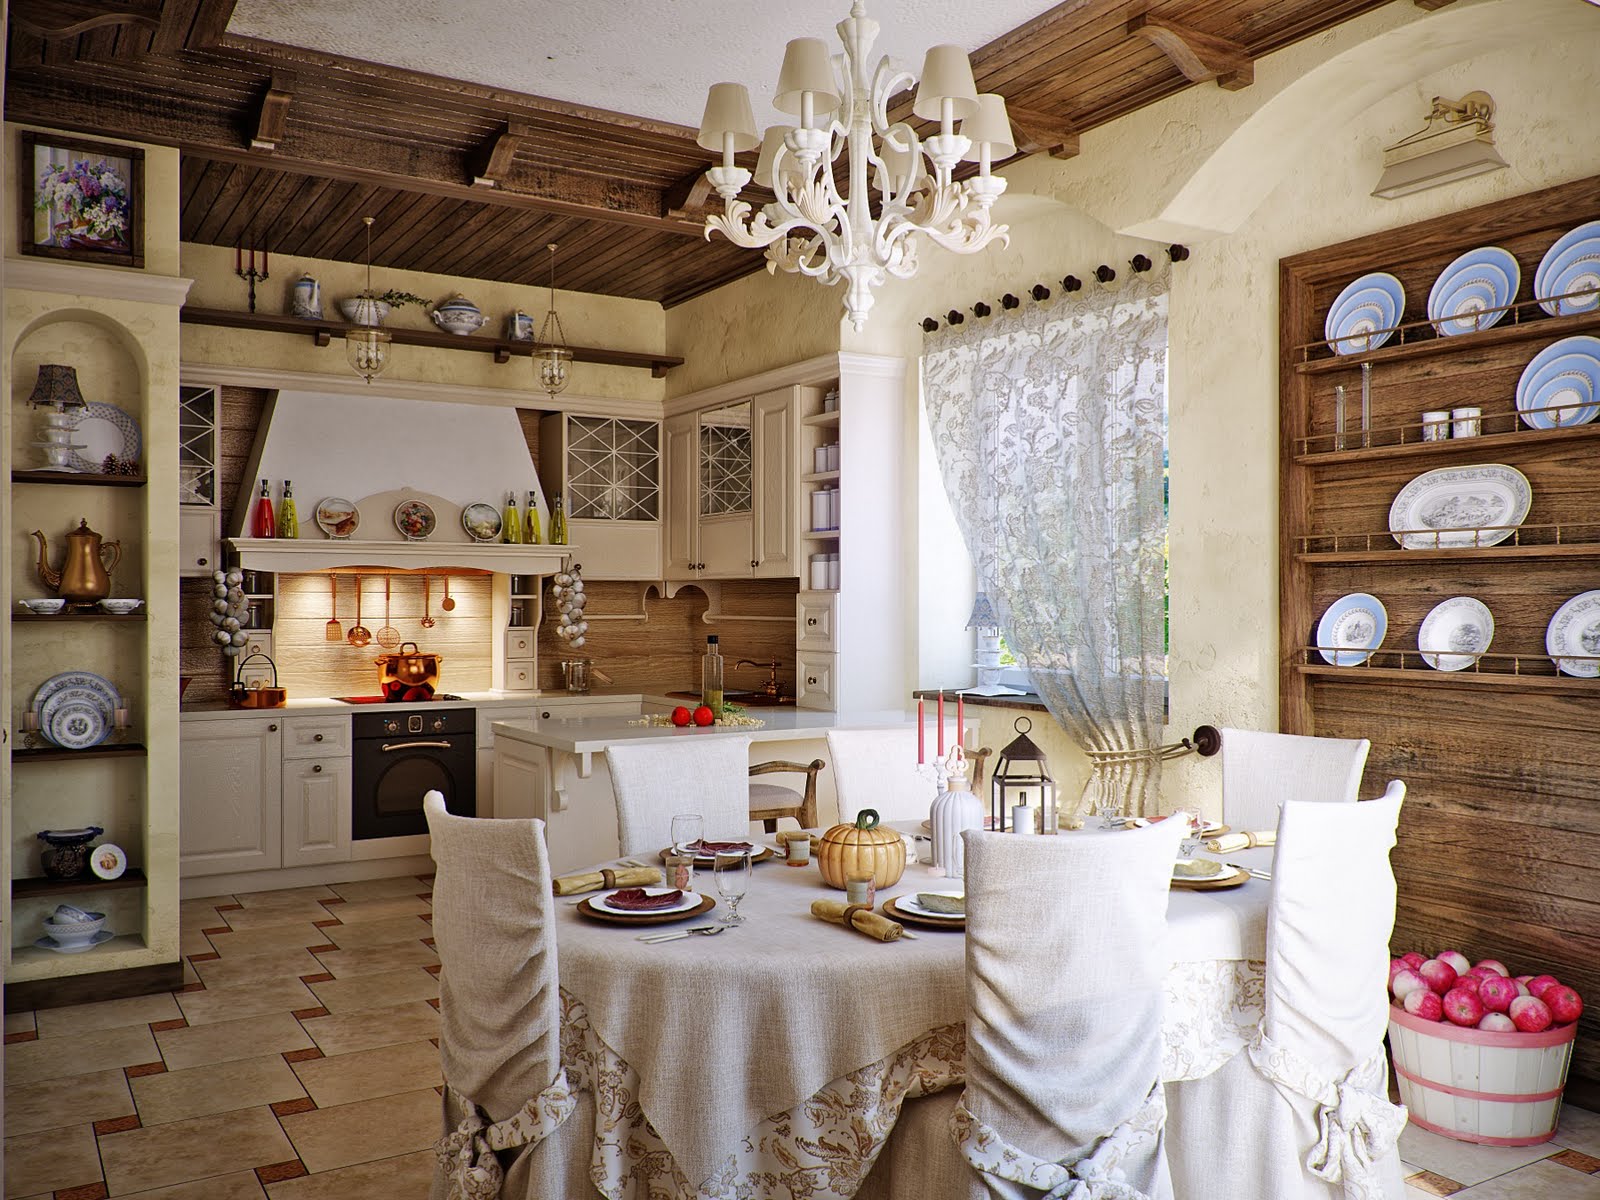 country kitchen designs interior svetlana attractive inspire kitchens style decorating decor chic house cuisine cucina decorate theme inspiration architecture decoholic